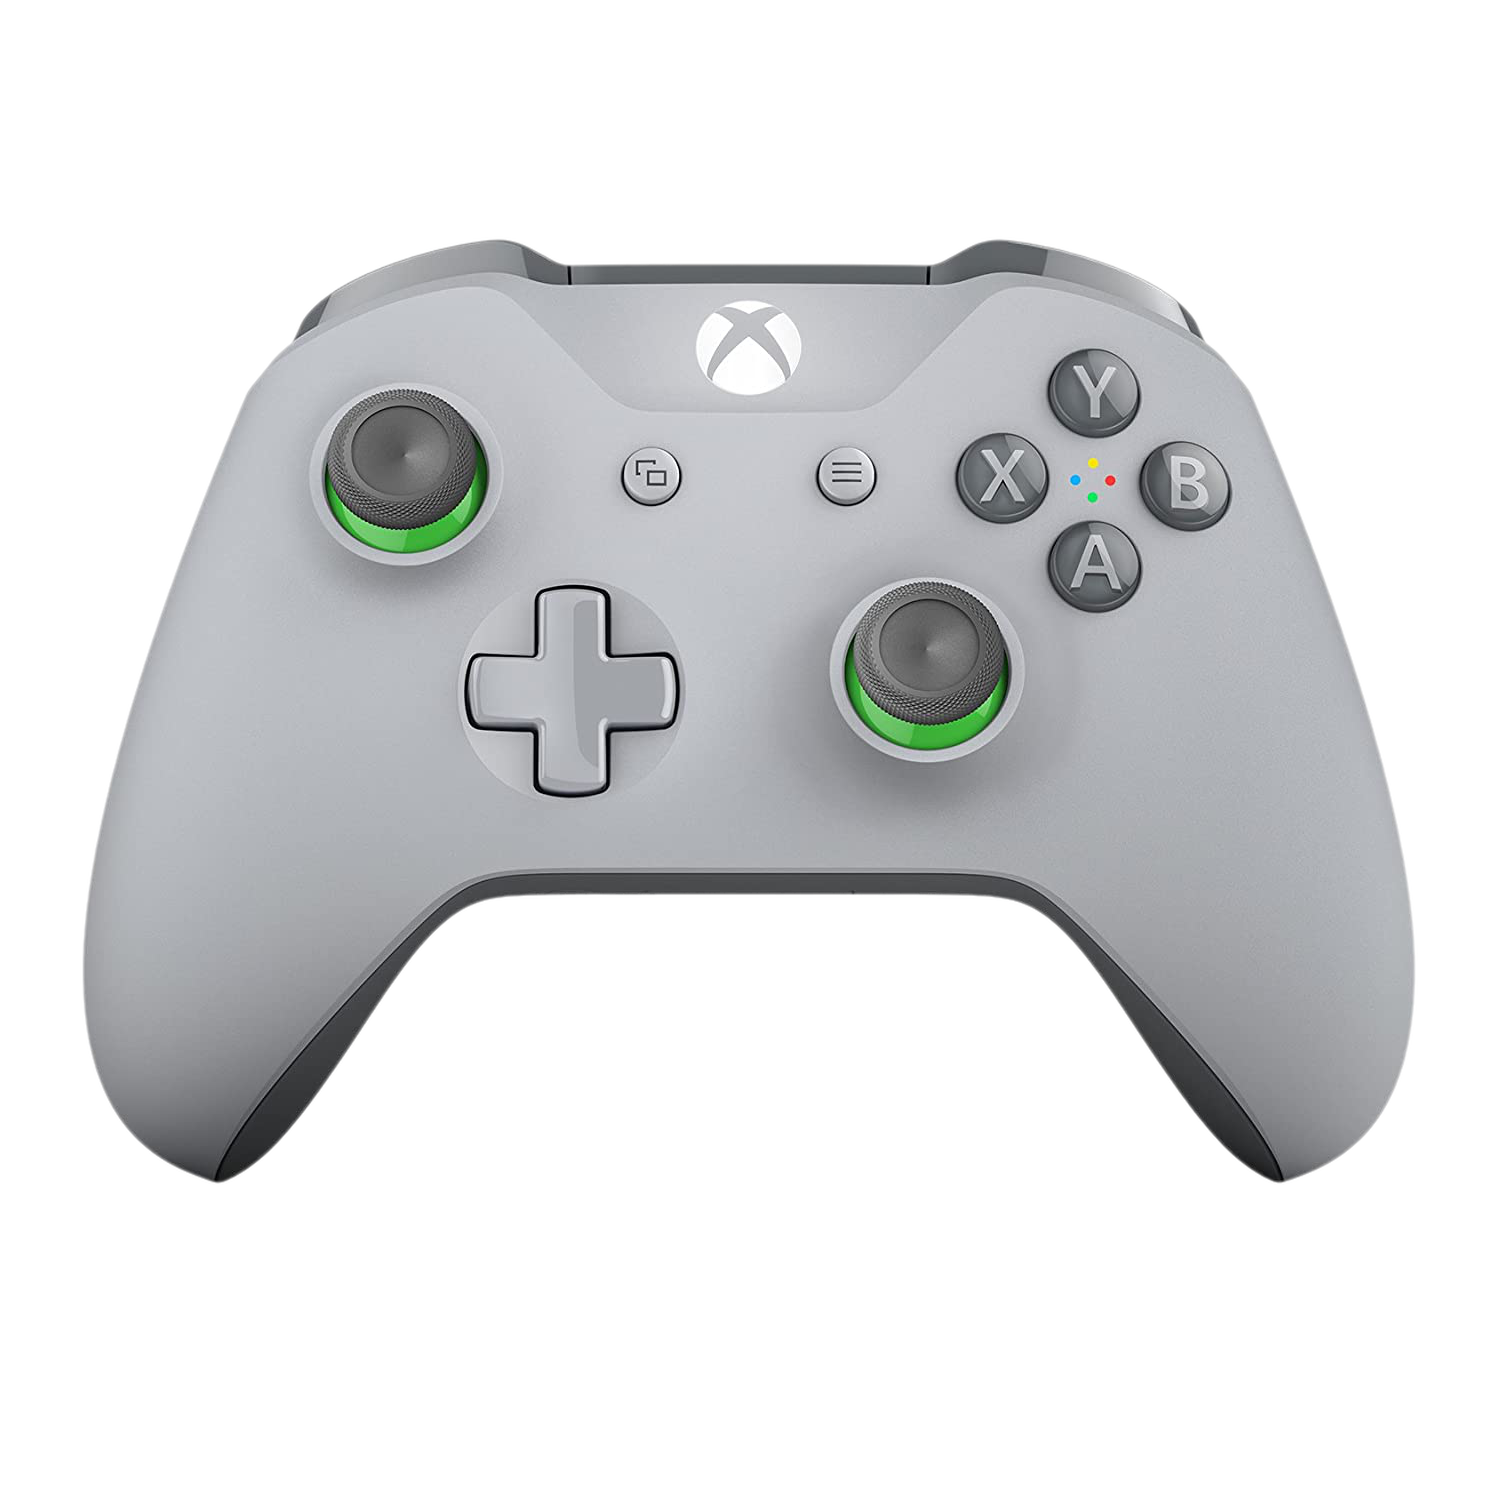 Microsoft-Official-Xbox-Controller-GreyGreen-Special-Edition-12-Months-Warranty-3_33e65d41-309f-4ad1-acee-5ed204ff3748